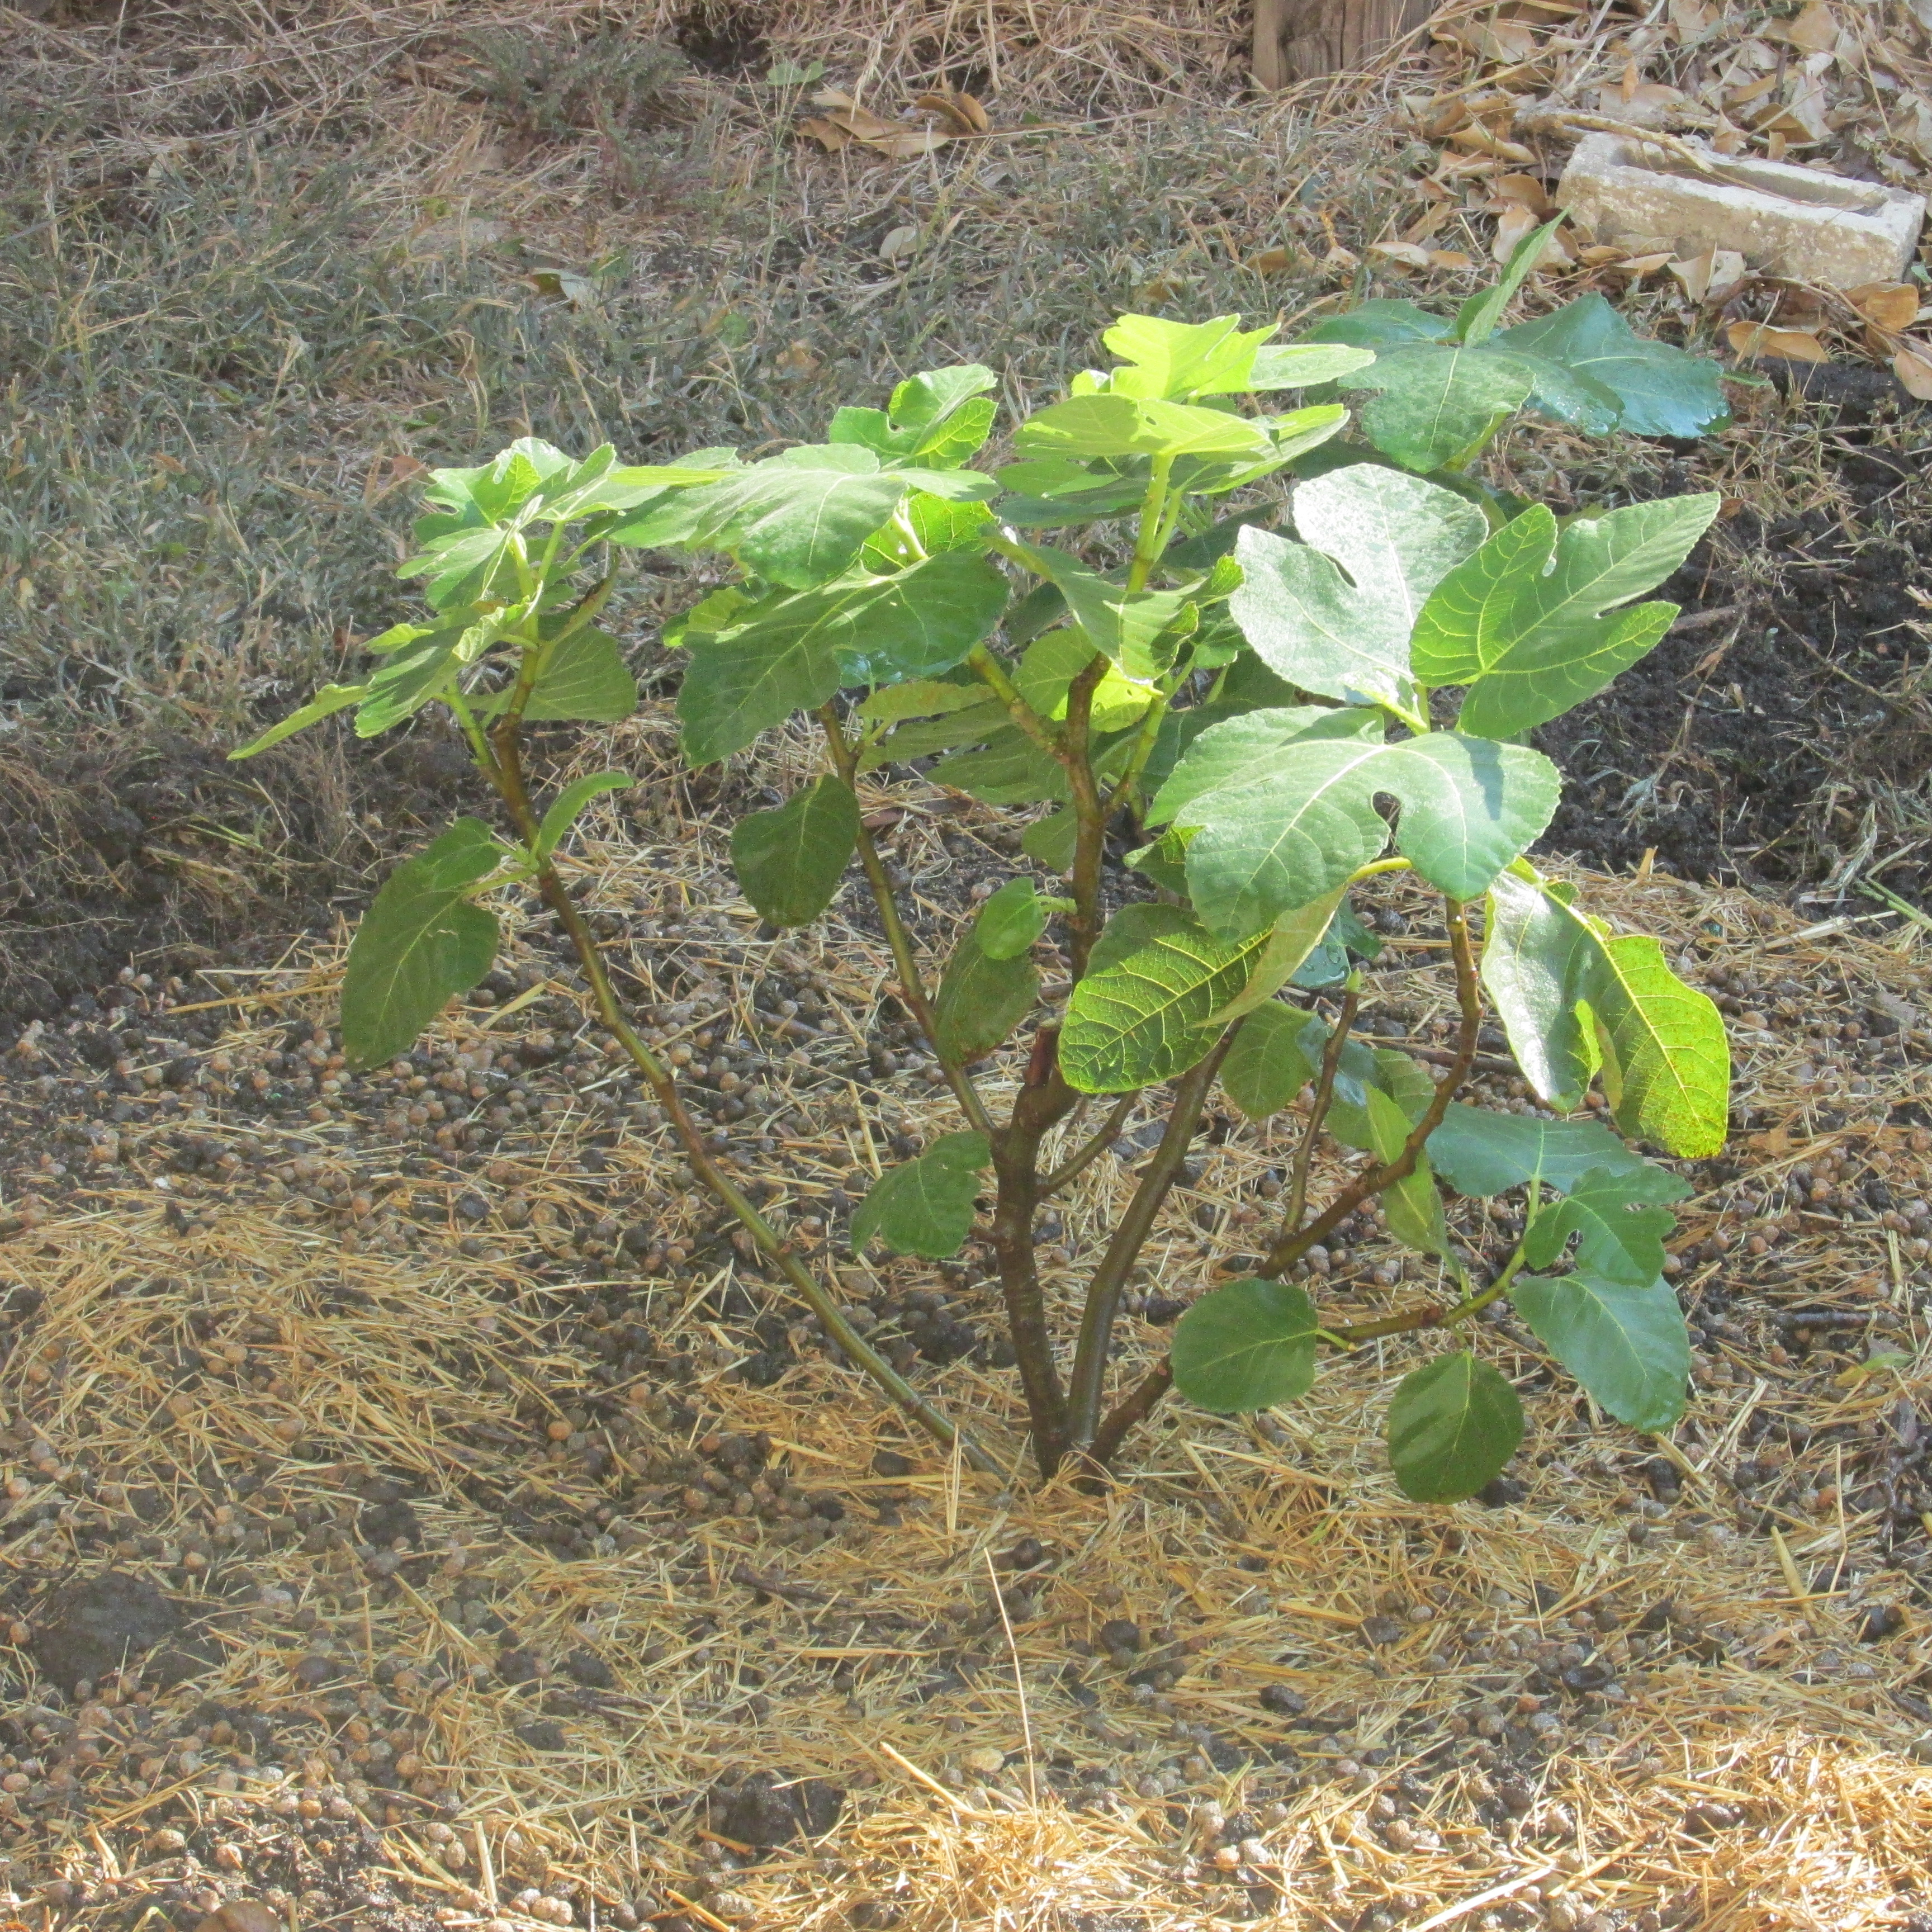 First Fruit Tree on the Homestead; Looking Forward to Figs